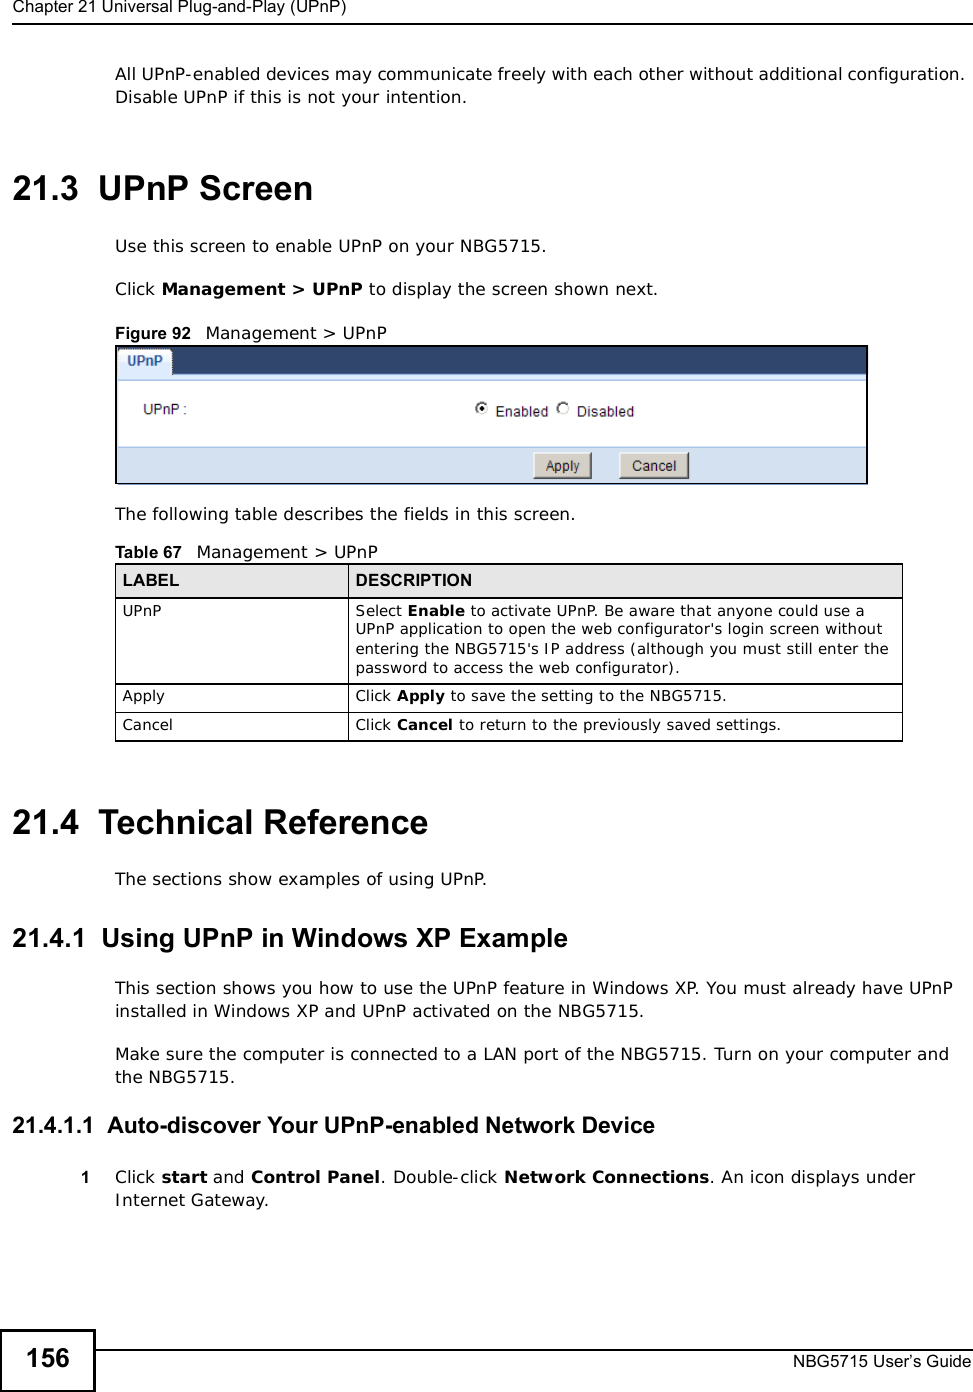 Chapter 21Universal Plug-and-Play (UPnP)NBG5715 User’s Guide156All UPnP-enabled devices may communicate freely with each other without additional configuration. Disable UPnP if this is not your intention. 21.3  UPnP Screen Use this screen to enable UPnP on your NBG5715.Click Management &gt; UPnP to display the screen shown next. Figure 92   Management &gt; UPnPThe following table describes the fields in this screen.21.4  Technical ReferenceThe sections show examples of using UPnP. 21.4.1  Using UPnP in Windows XP ExampleThis section shows you how to use the UPnP feature in Windows XP. You must already have UPnP installed in Windows XP and UPnP activated on the NBG5715.Make sure the computer is connected to a LAN port of the NBG5715. Turn on your computer and the NBG5715. 21.4.1.1  Auto-discover Your UPnP-enabled Network Device1Click start and Control Panel. Double-click Network Connections. An icon displays under Internet Gateway.Table 67   Management &gt; UPnPLABEL DESCRIPTIONUPnP Select Enable to activate UPnP. Be aware that anyone could use a UPnP application to open the web configurator&apos;s login screen without entering the NBG5715&apos;s IP address (although you must still enter the password to access the web configurator).Apply Click Apply to save the setting to the NBG5715.Cancel Click Cancel to return to the previously saved settings.